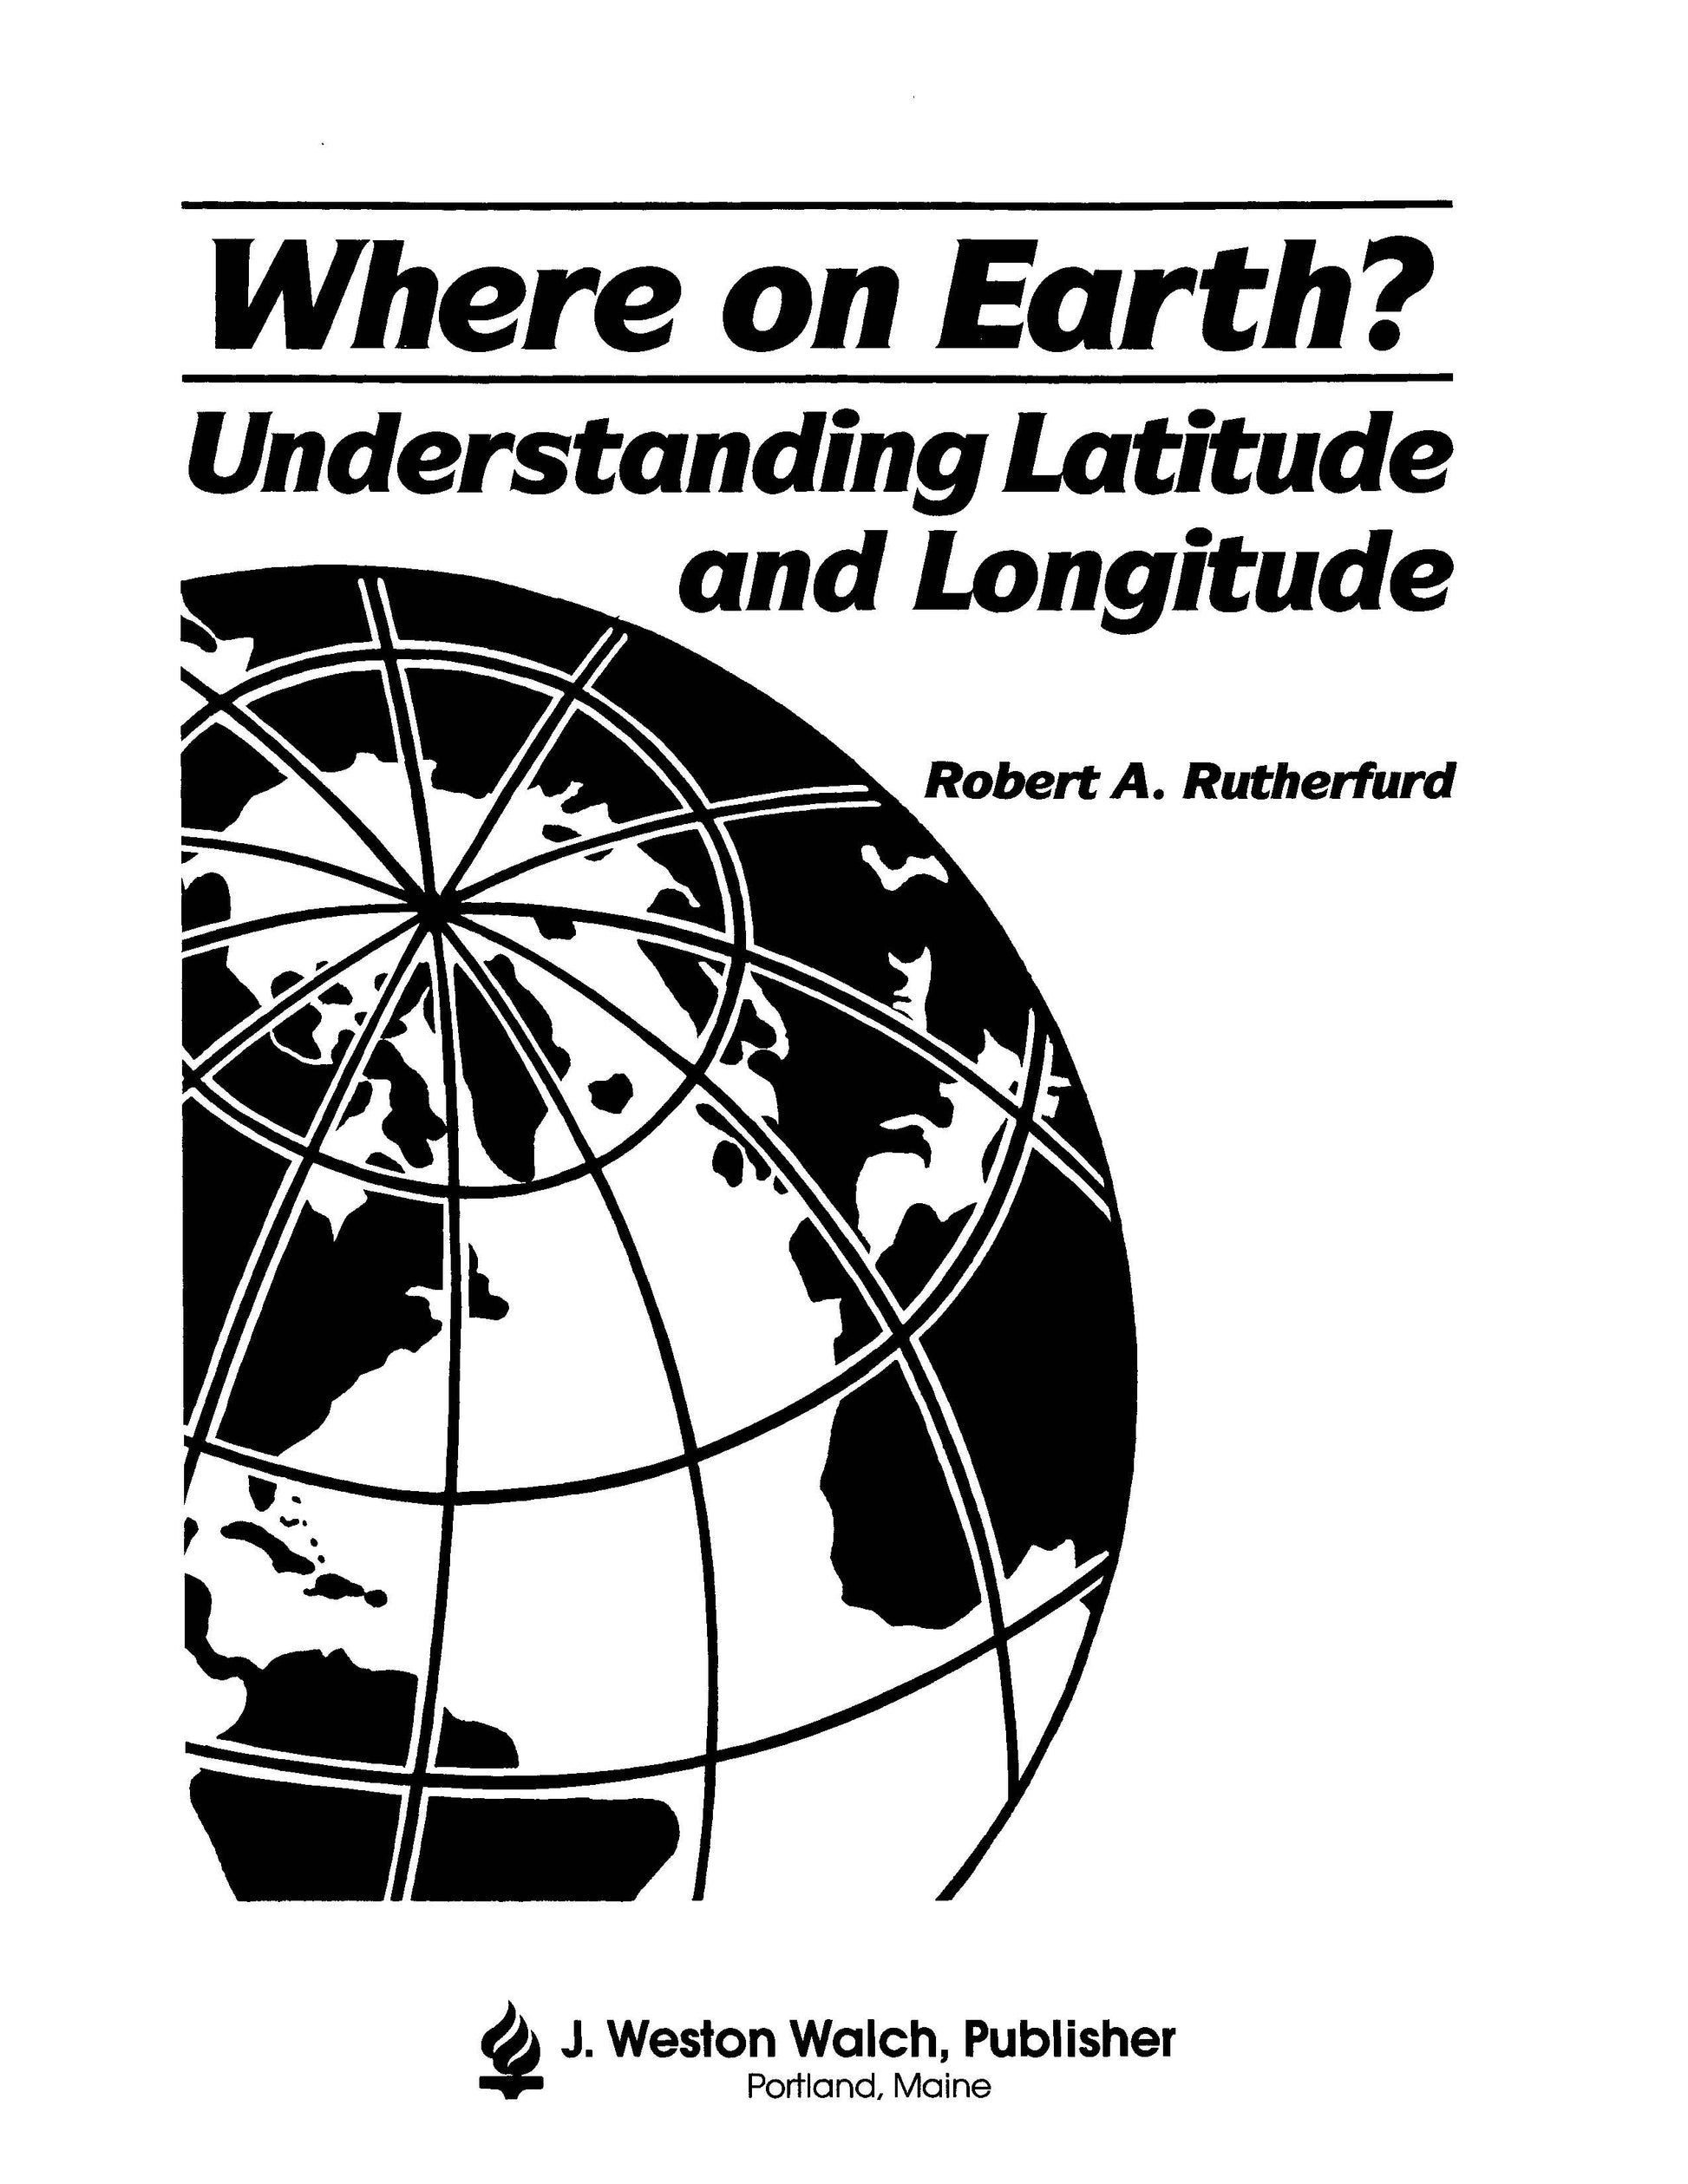 Latitude and Longitude, Geography Fundamentals, Geographical Information, Educational Resources, Geography Curriculum, Classroom-tested Approach, Geography Teacher, Skills Development, Latitude and Longitude Lessons, Geographical Proficiency, Grid Lines, Mercator Maps, Elliptical Maps, Reproducible Material, Worksheets, Activities, Maps, Humanities Education.